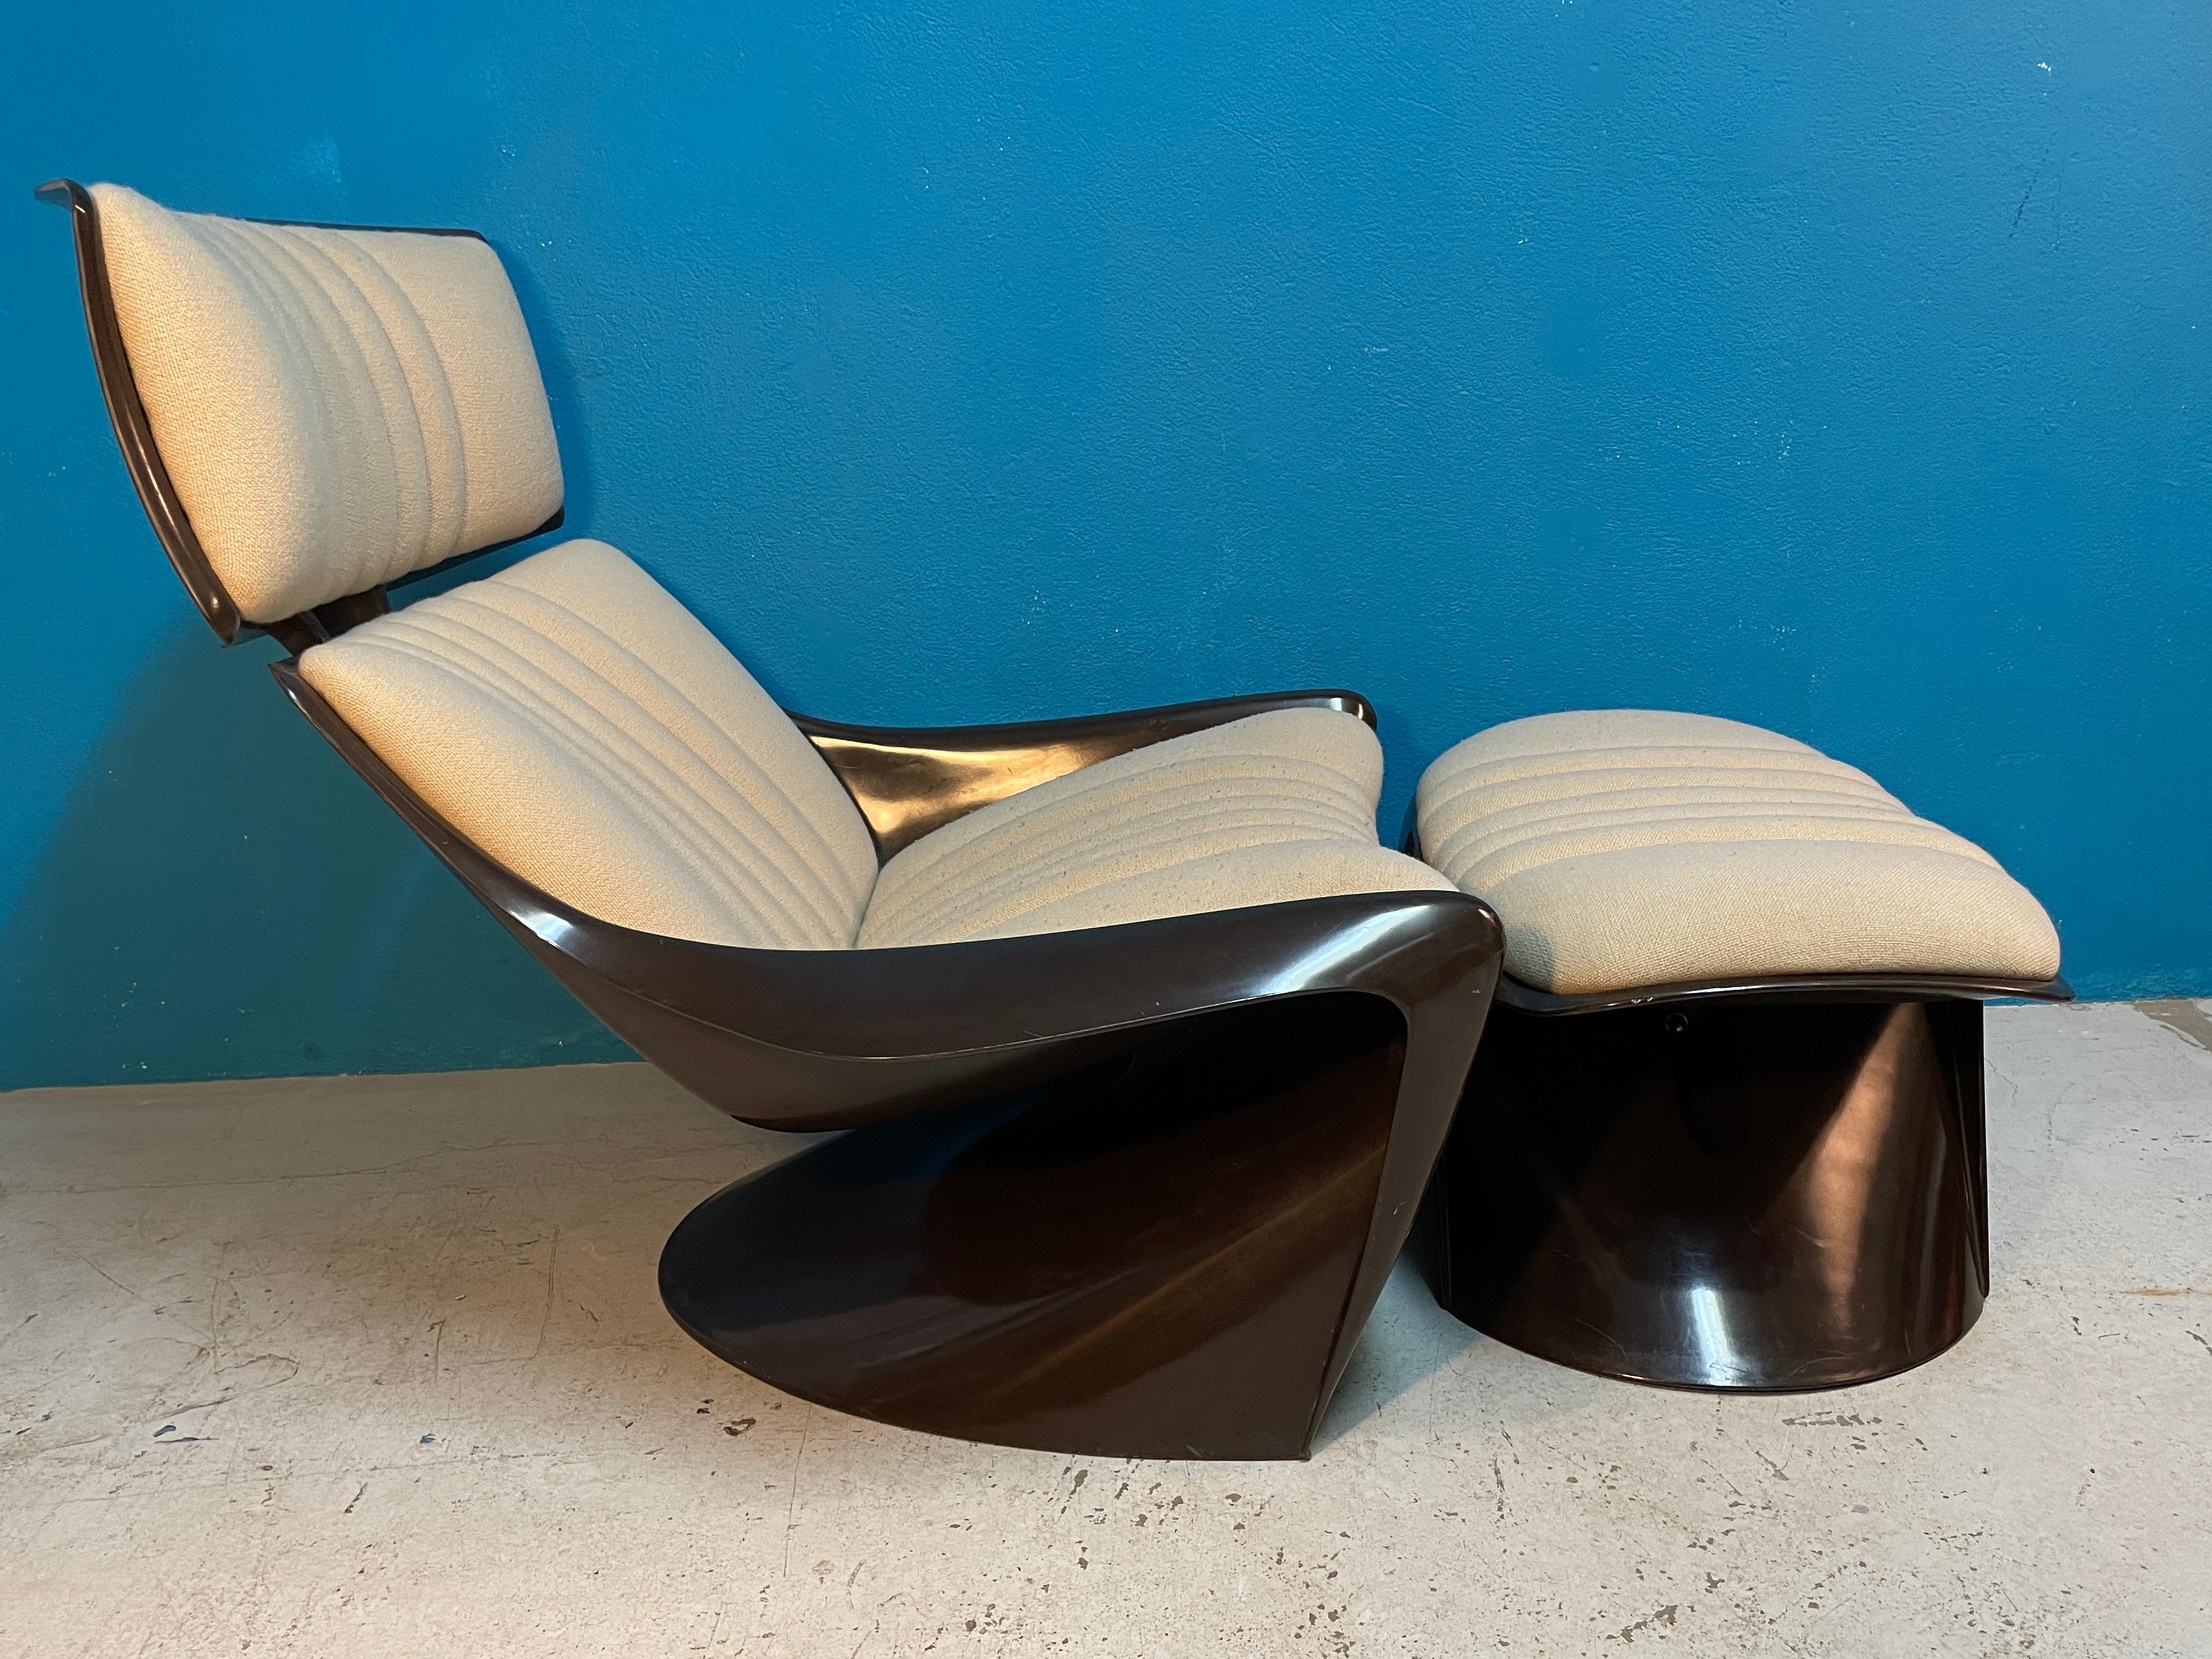 The President Meteor lounge chair 265 was designed by the original king of space age design the Danish furniture designer Steen Ostergaard in 1968. Chair is also known as 